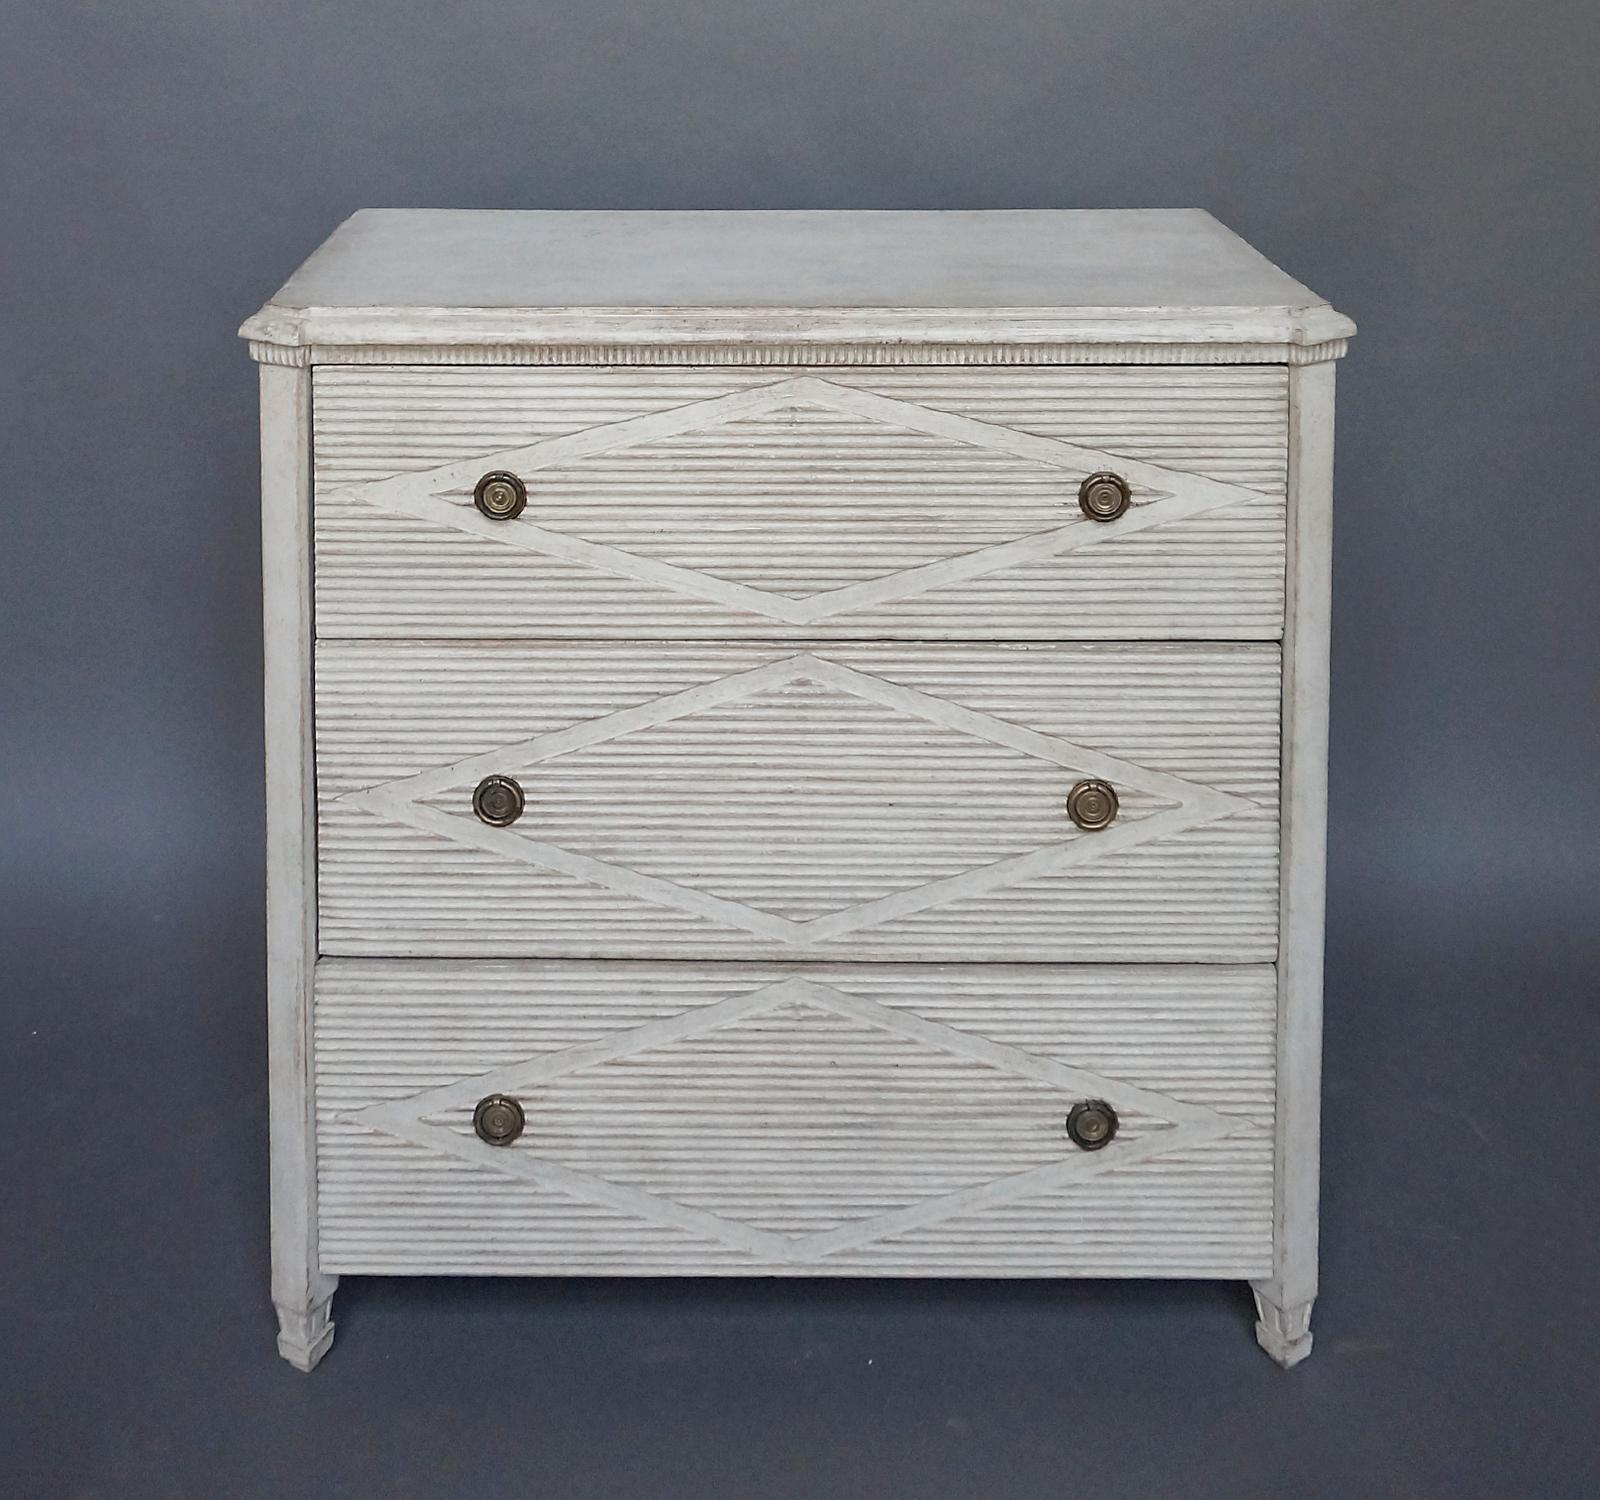 Three-drawer chest, Sweden, circa 1890, in the Gustavian Style. Dentil detail under the shaped top, canted corners, and square feet. The drawer fronts have the original brass pulls and recessed lozenges in the over-all horizontal reeding.  No